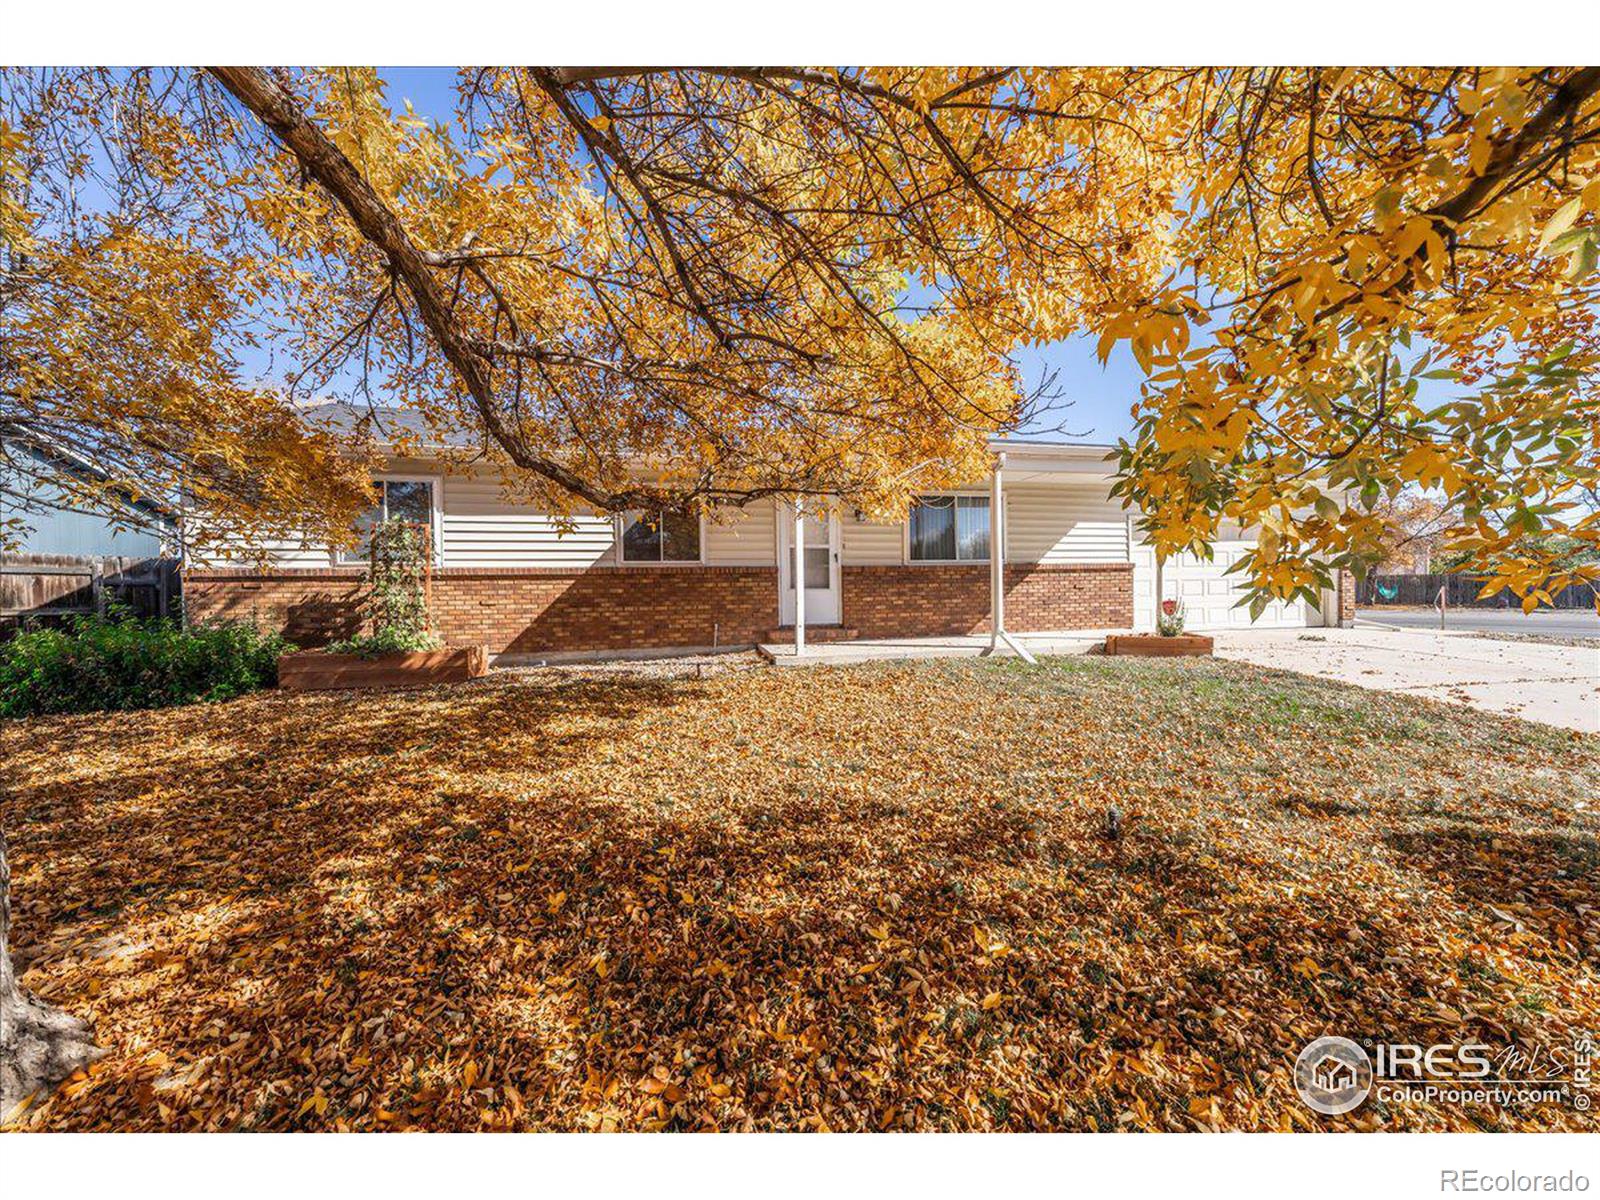 3608  conifer drive, Loveland sold home. Closed on 2024-01-23 for $396,000.